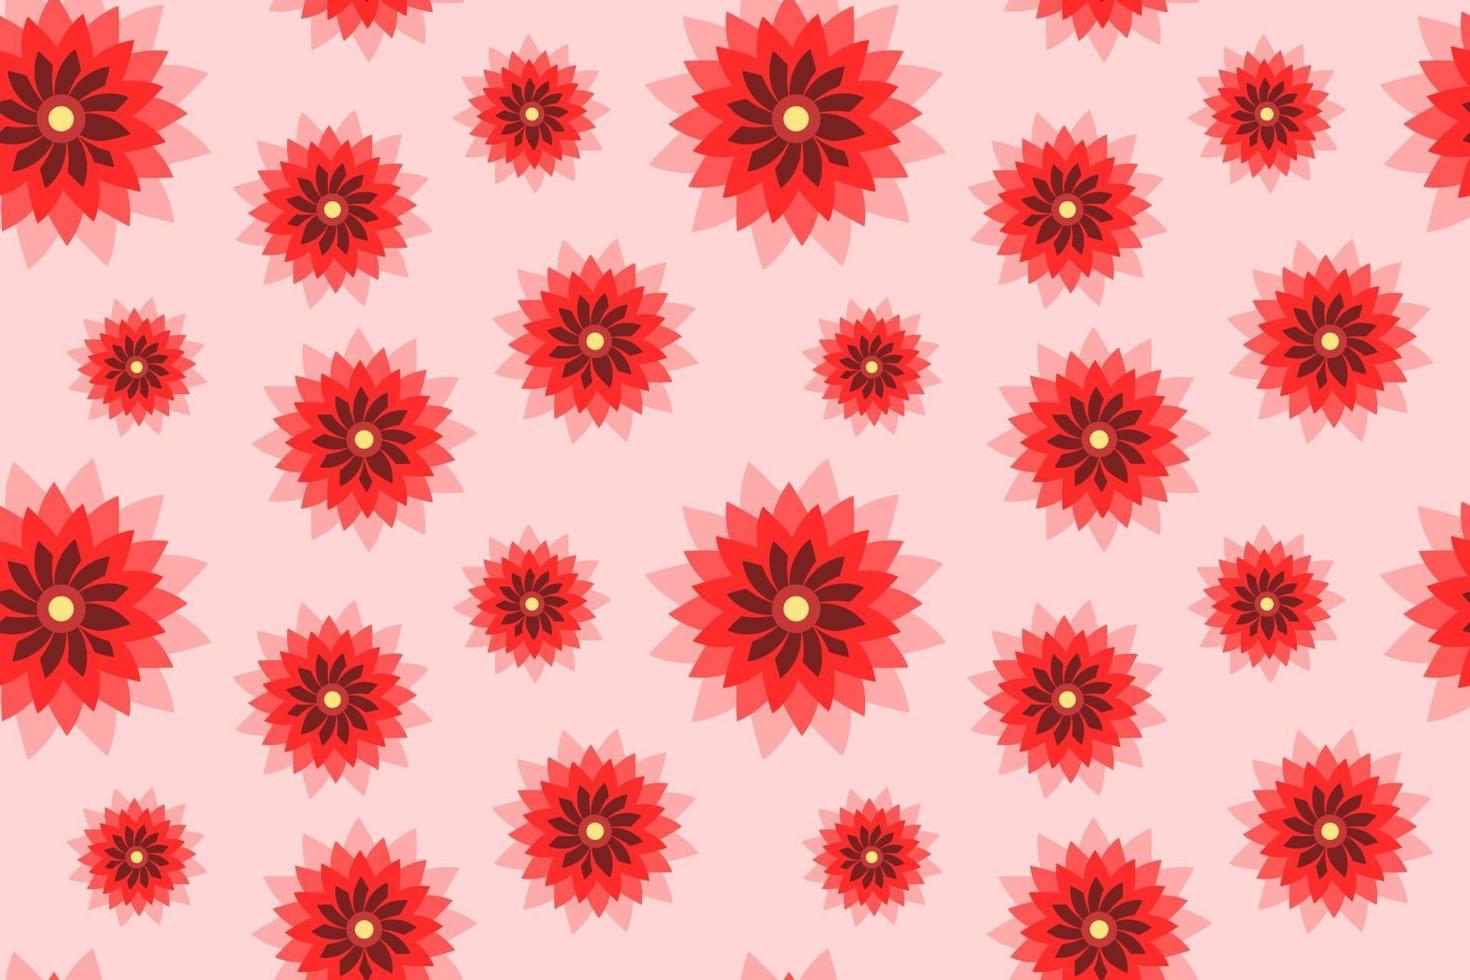 Dahlia Red Flowers Abstract Flat Illustration. Seamless Pattern Design vector